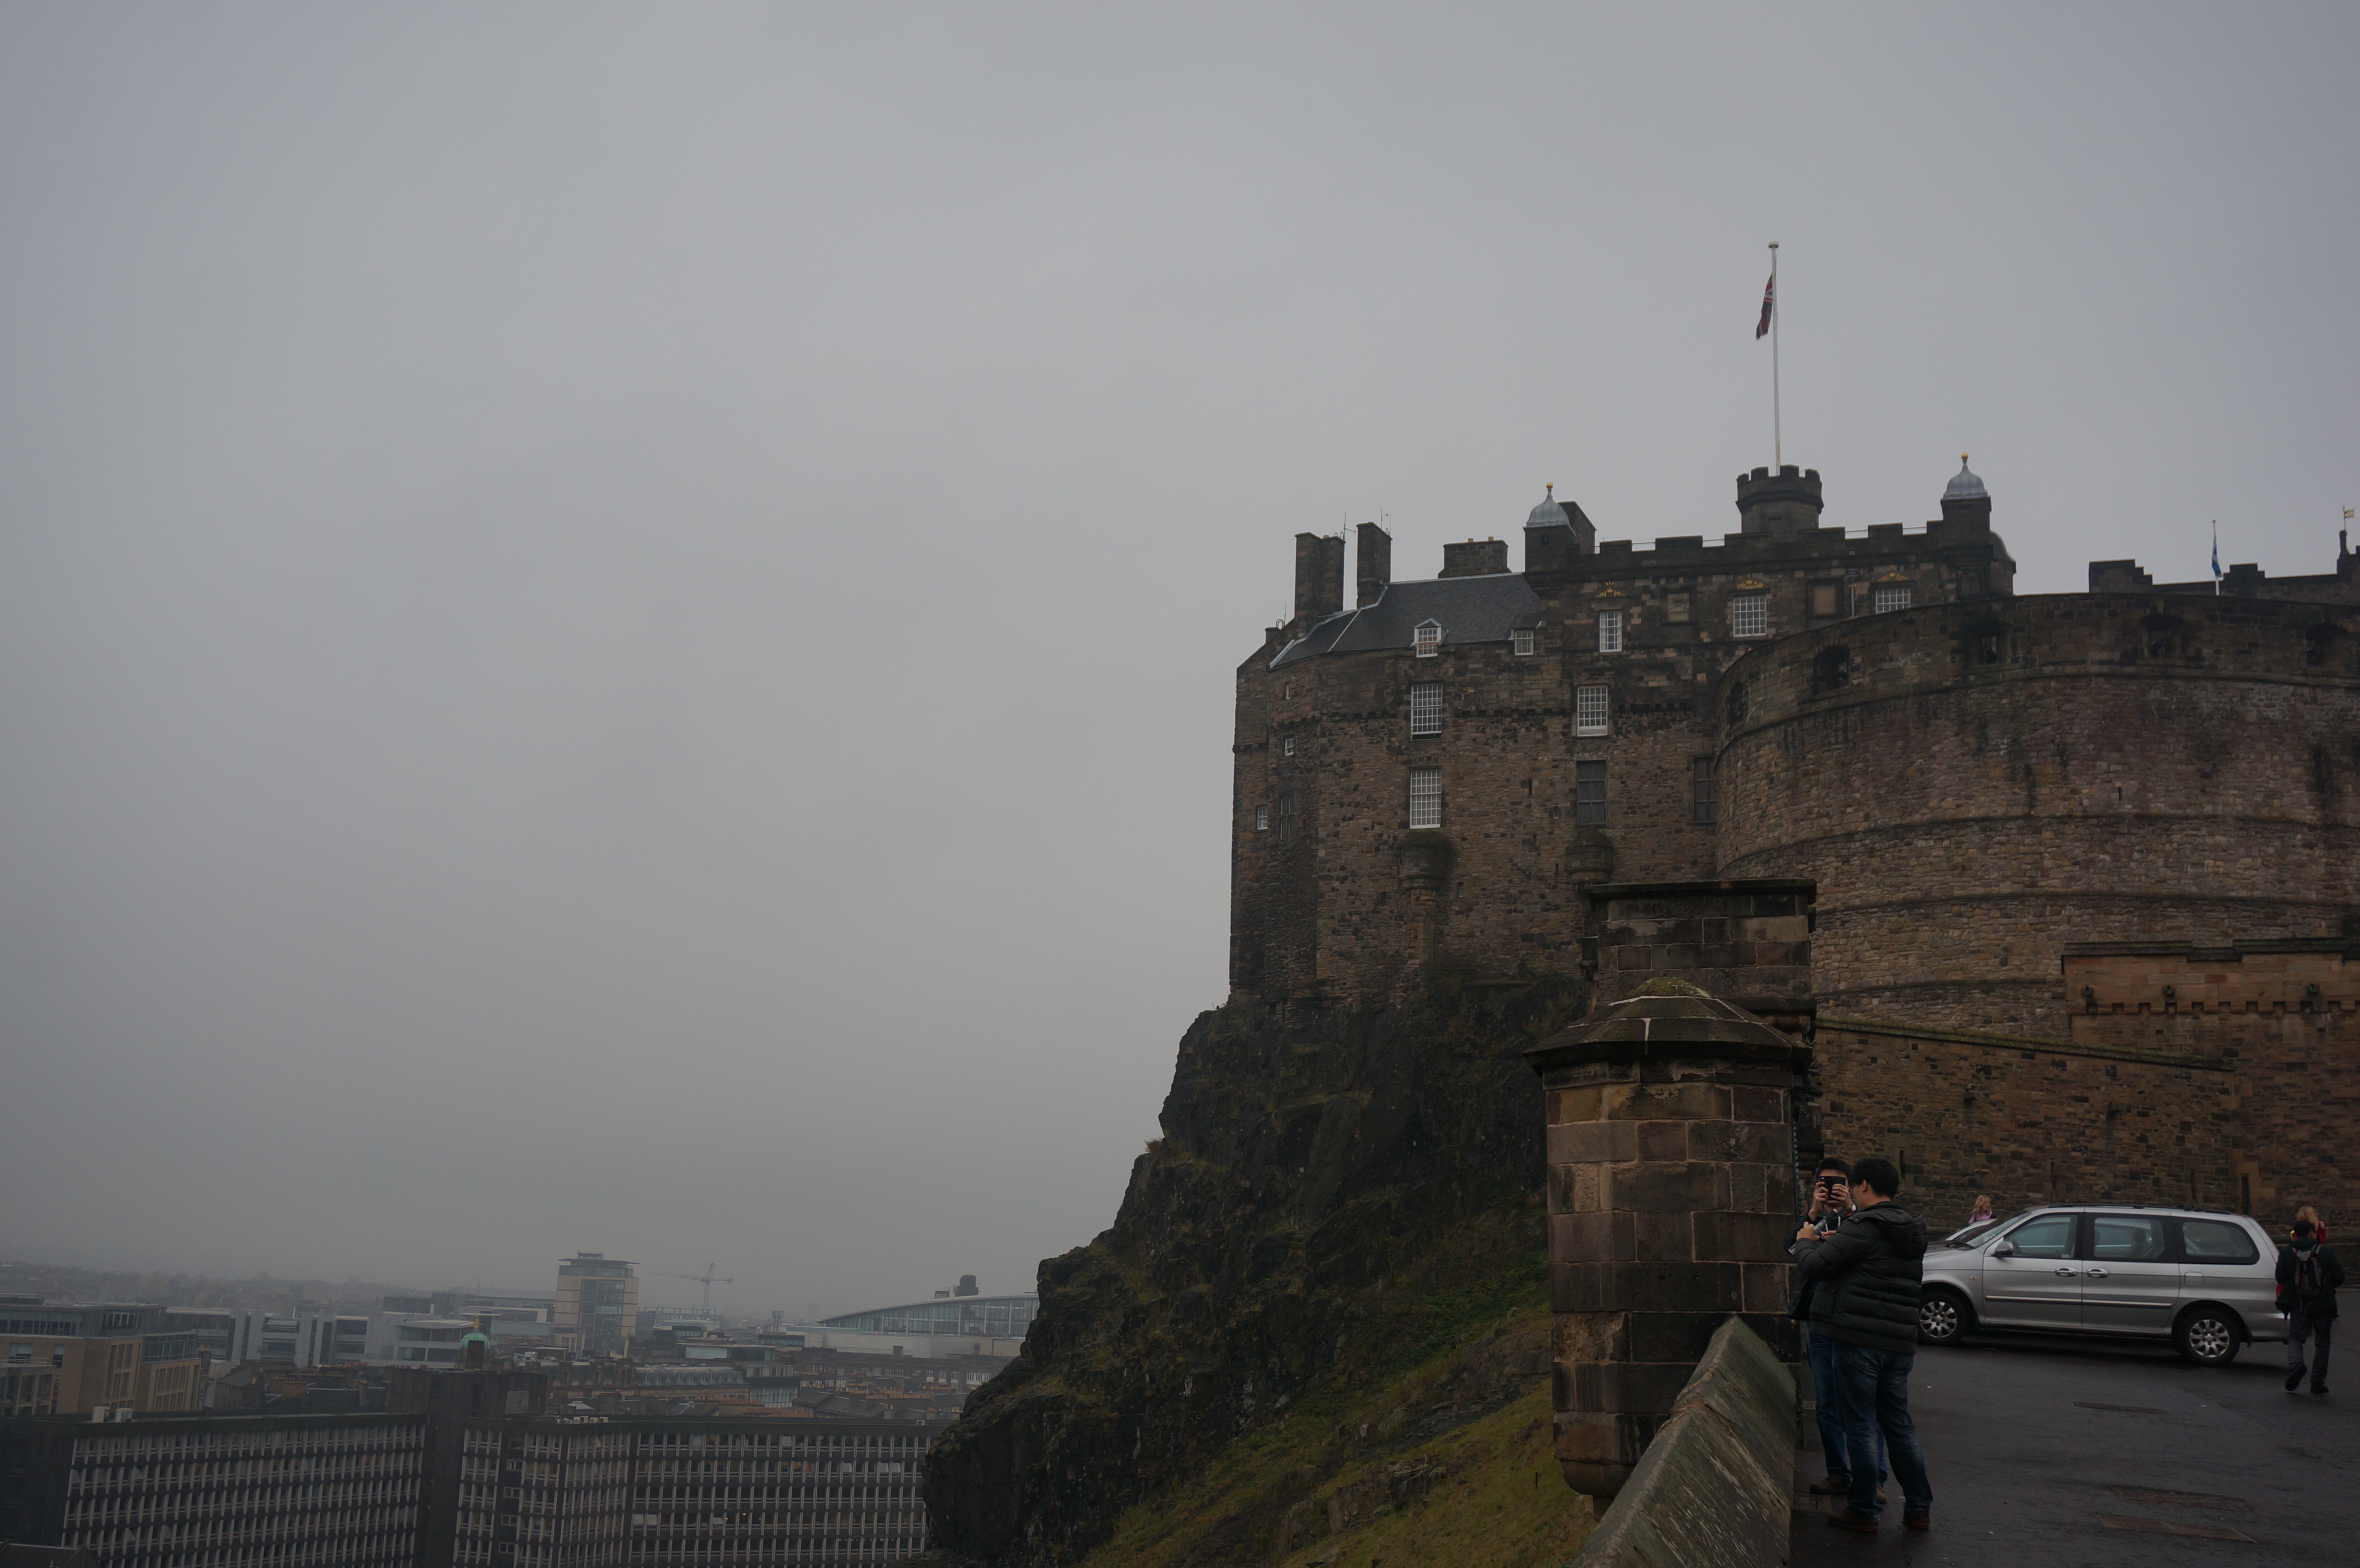 From palaces and Potter to lochs and Bond, there's so much to explore in and around Edinburgh, Scotland.